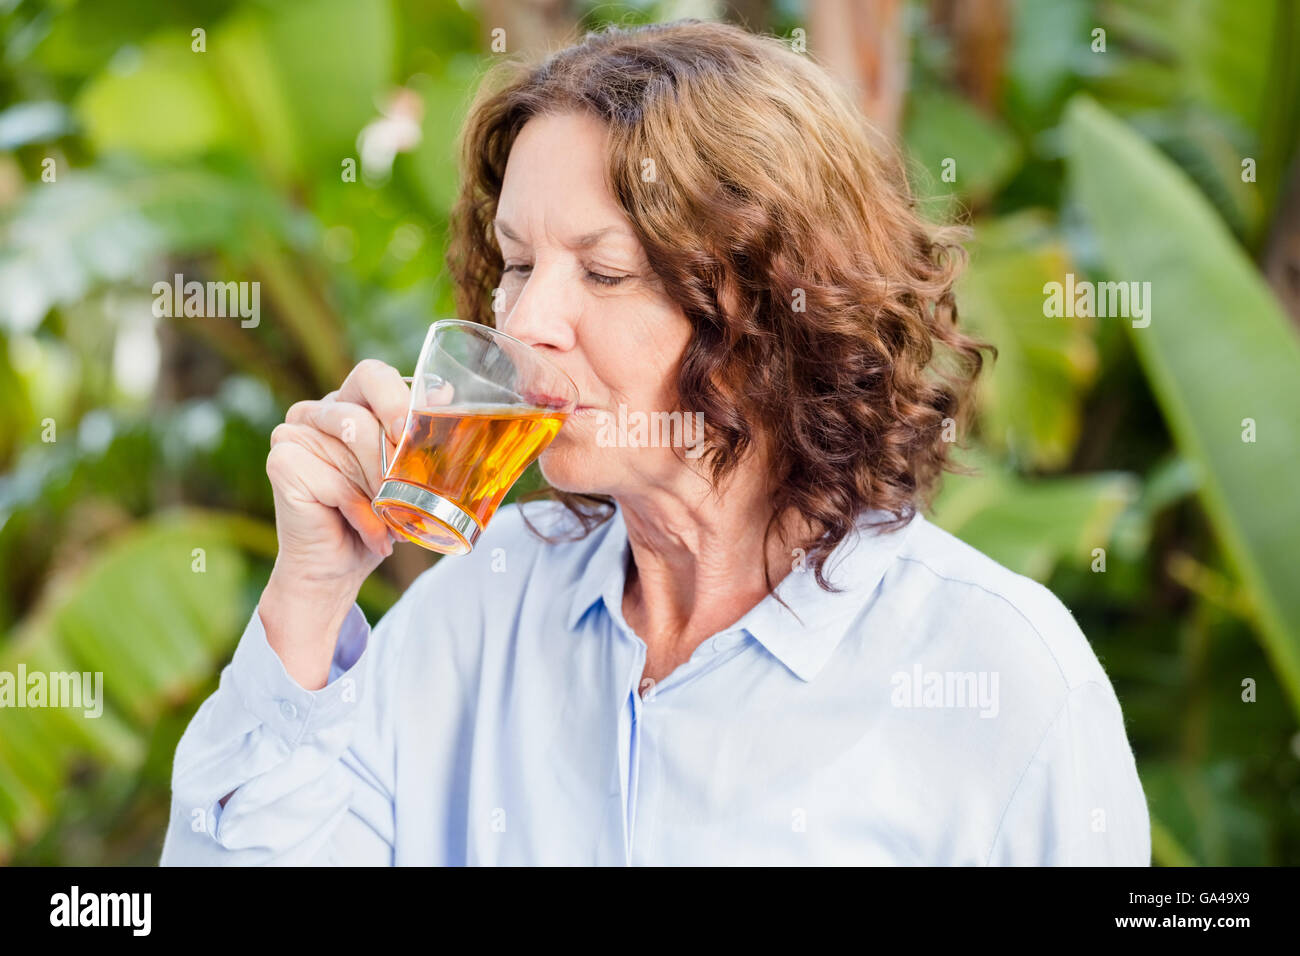 Young woman drinking herbal tea Banque D'Images